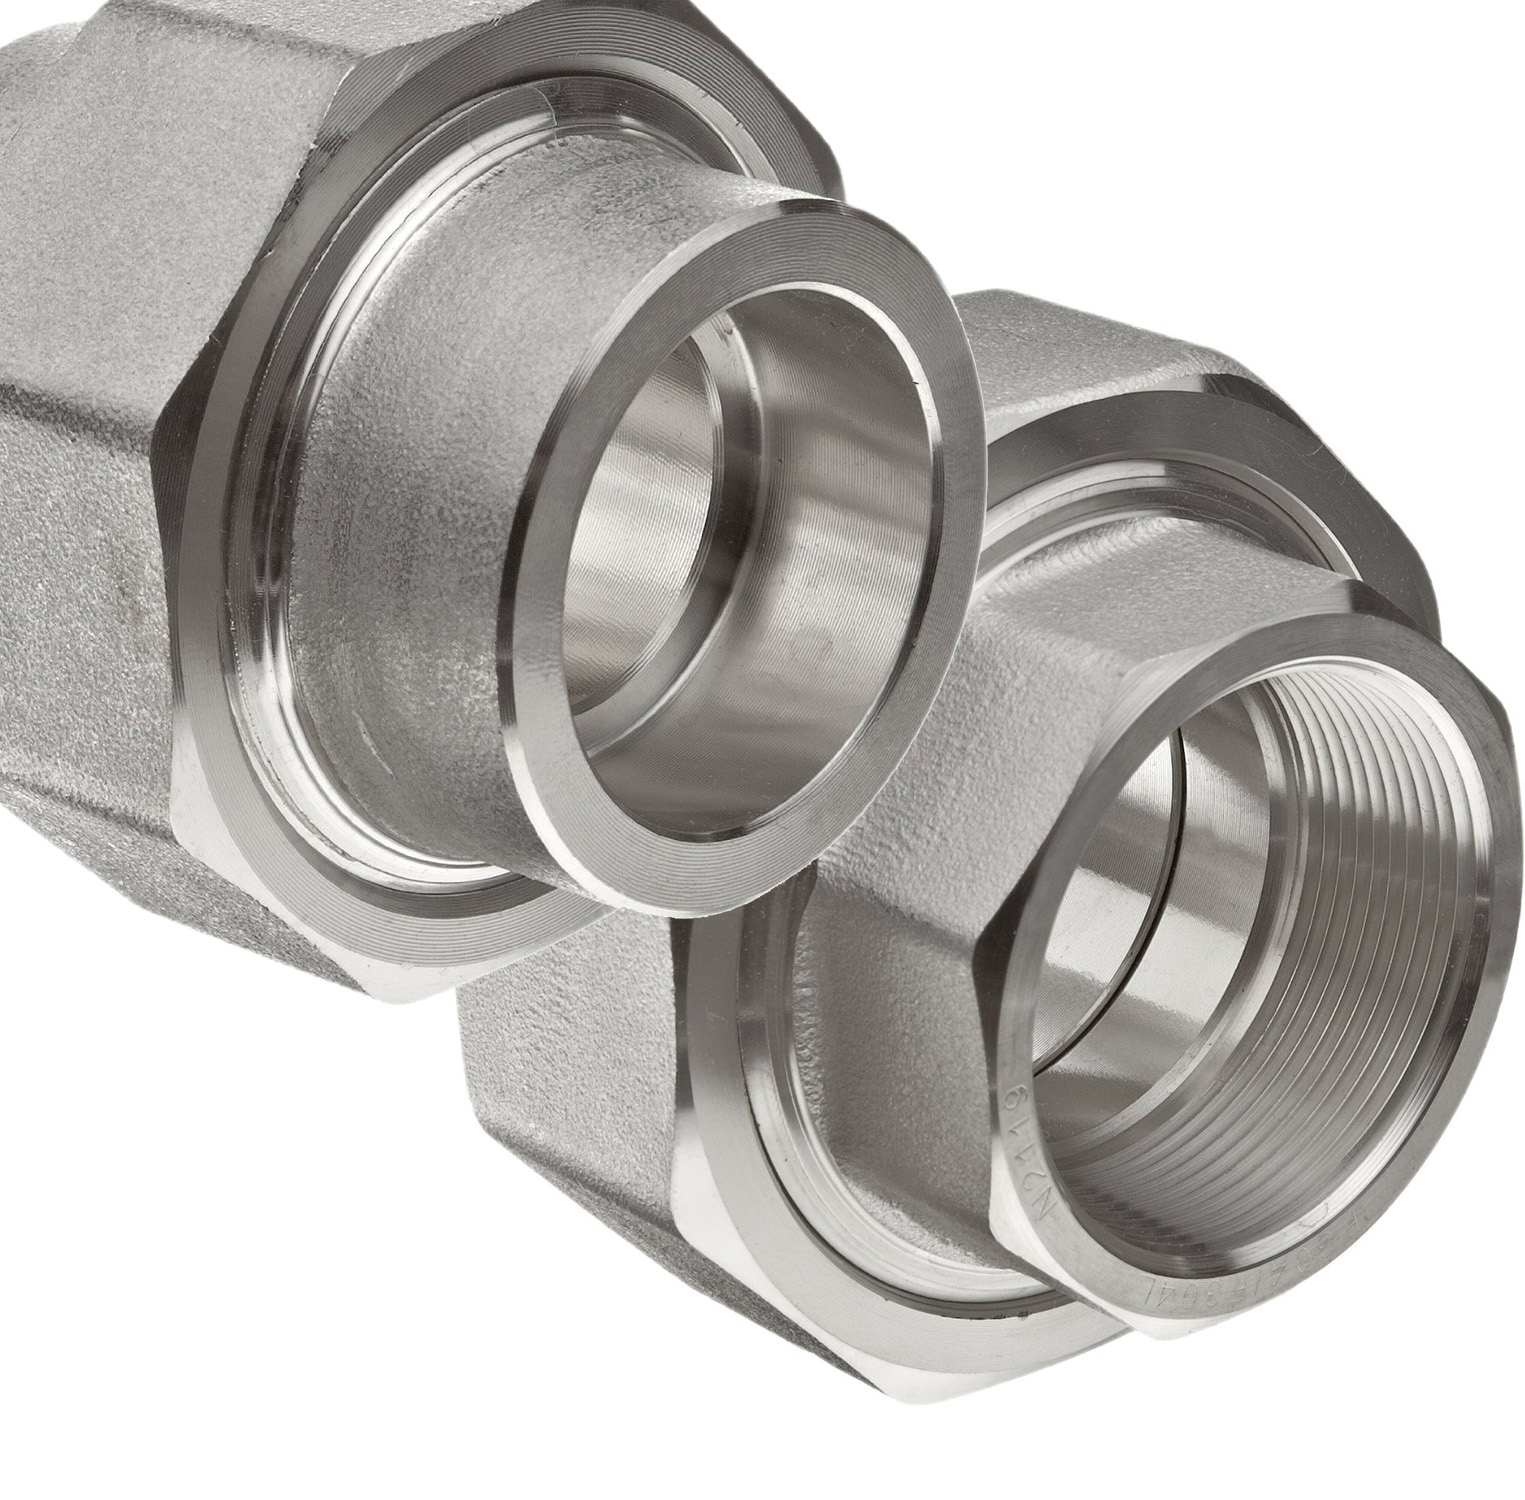 Details about   Threaded 1-1/2" NPT Union 316/316L 3000LB Stainless Steel Pipe Fitting 